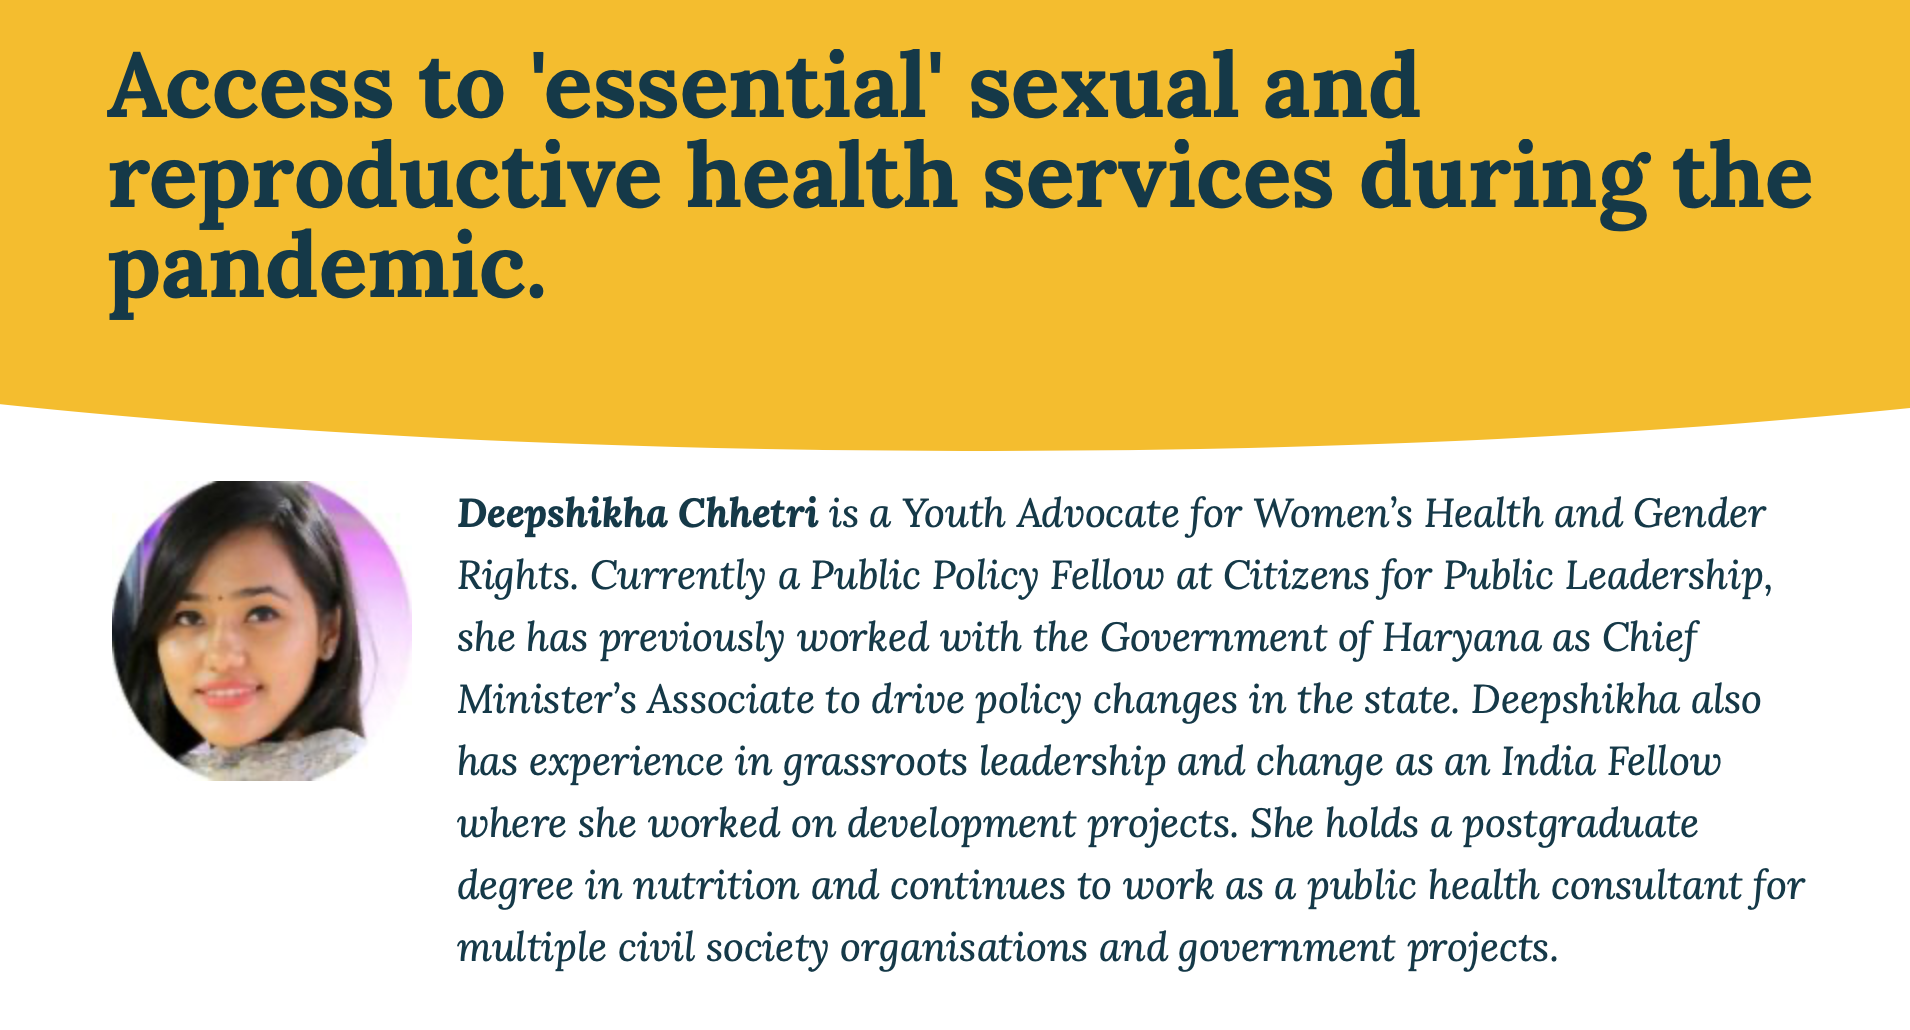 Access to essential sexual and reproductive health services during the pandemic